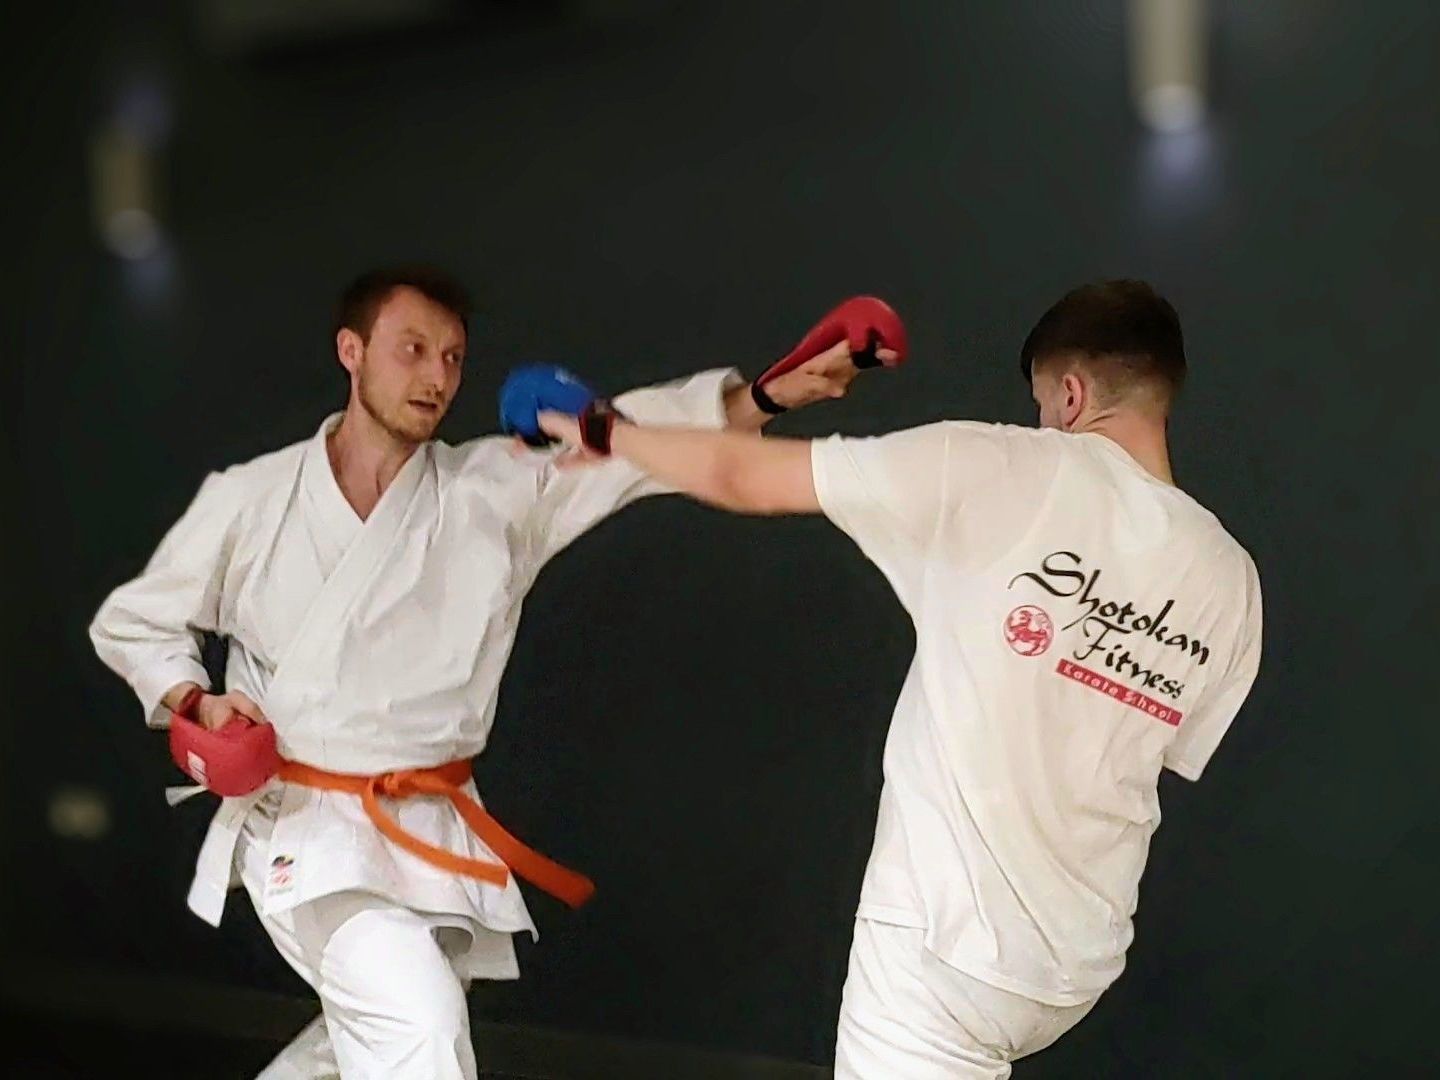 Philosophy and style of Karate - especially Shotokan karate - block and then counter-attack.